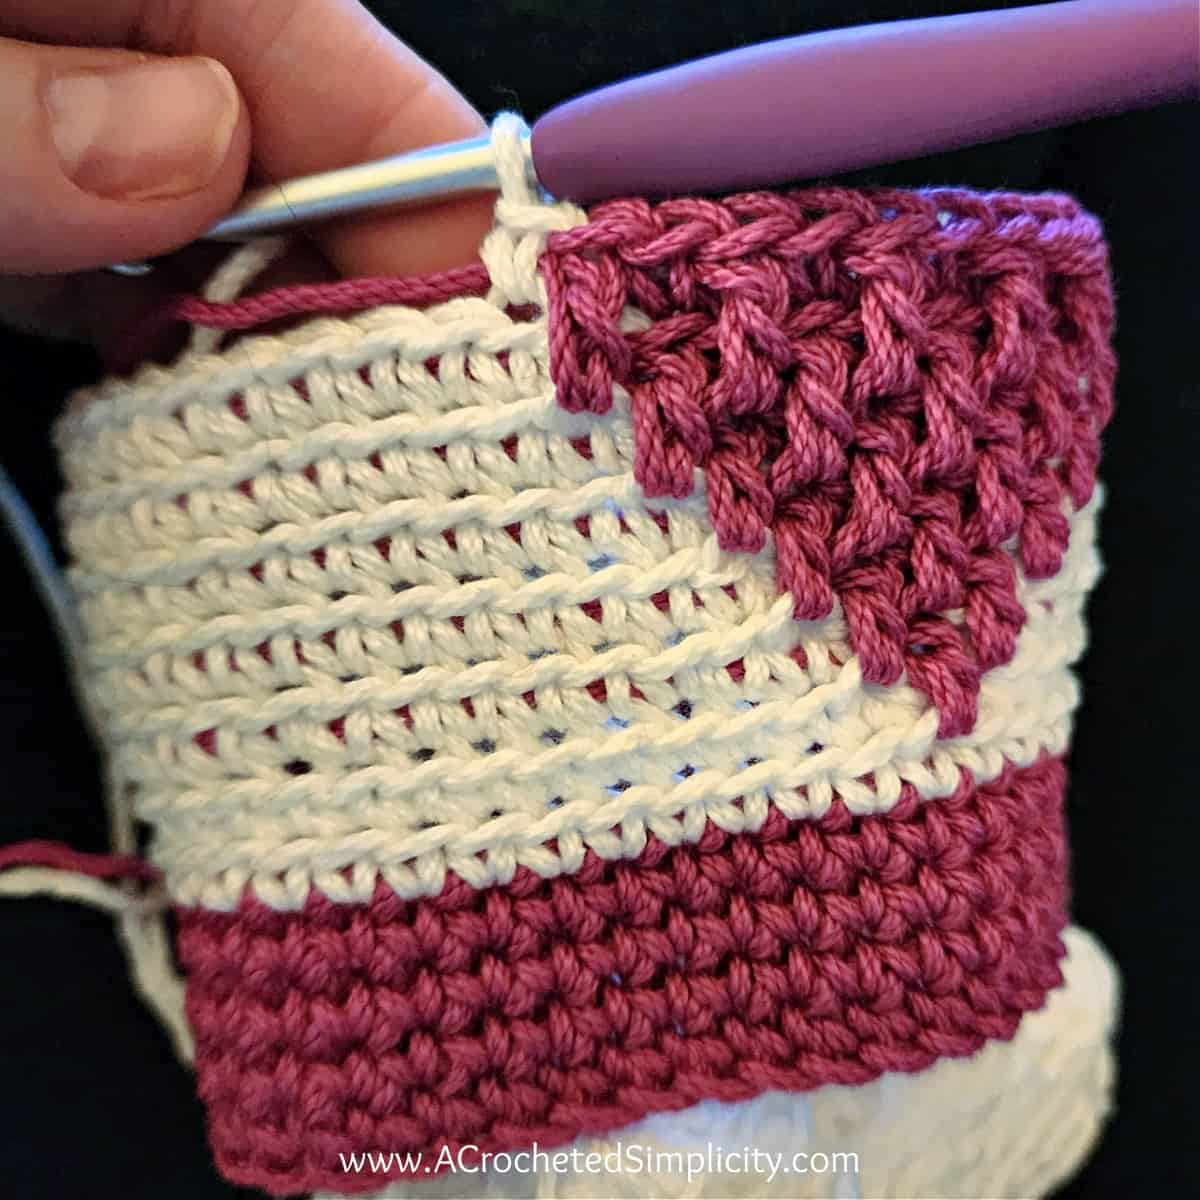 Close up of a crochet valentines treat bag showing how to change colors from pink to white.